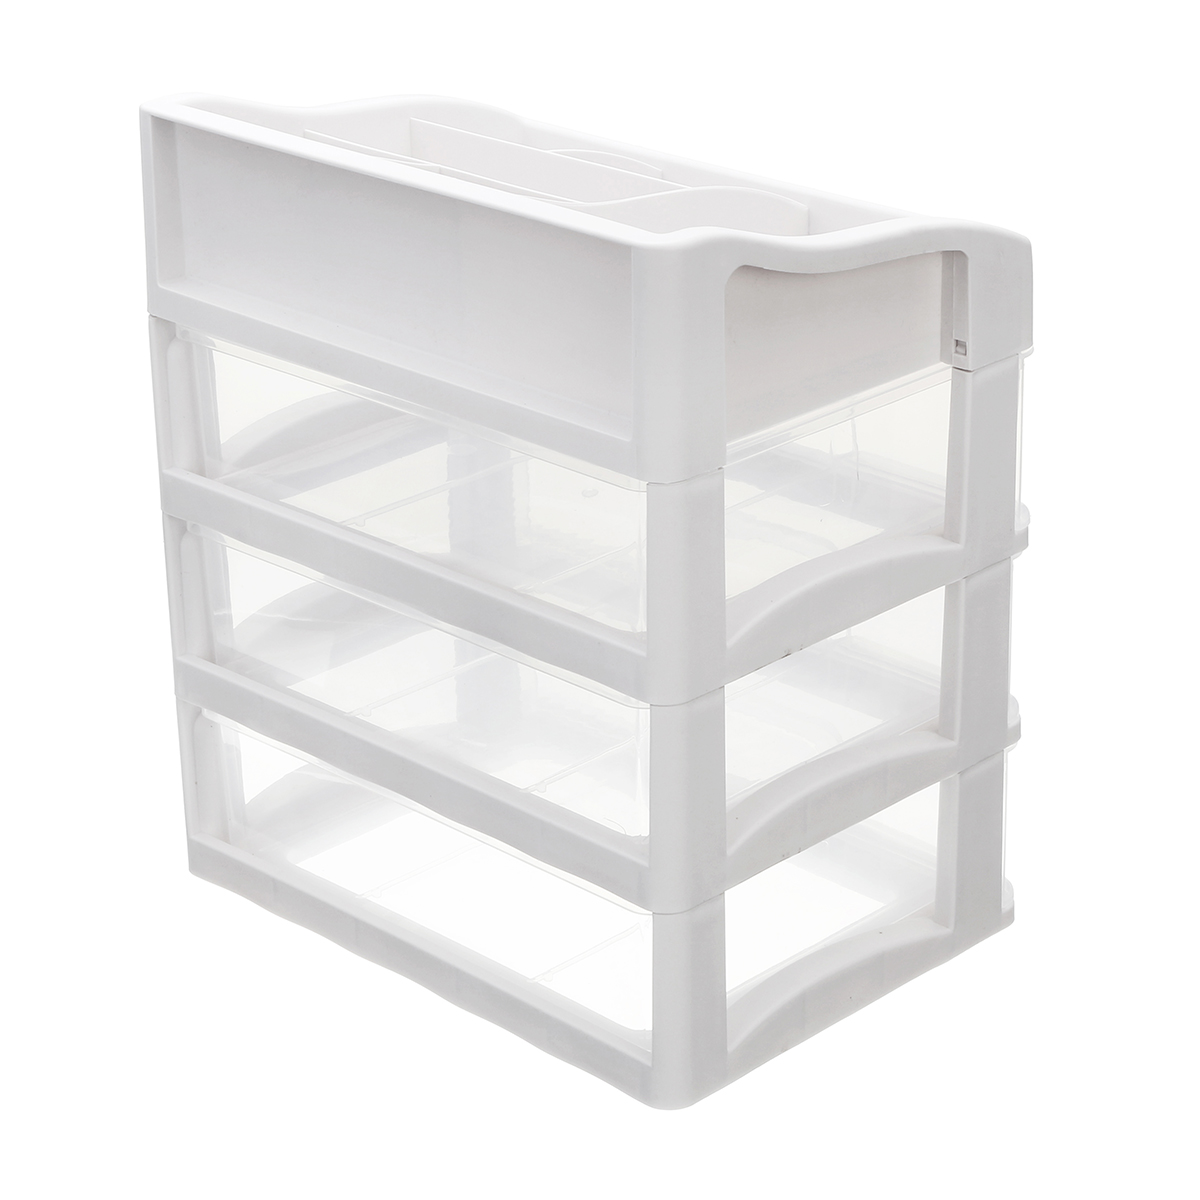 Plastic-Makeup-Holder-Box-Storage-Desktop-Container-Cosmetic--Jewelry-Container-Table-Organizer-1563970-4